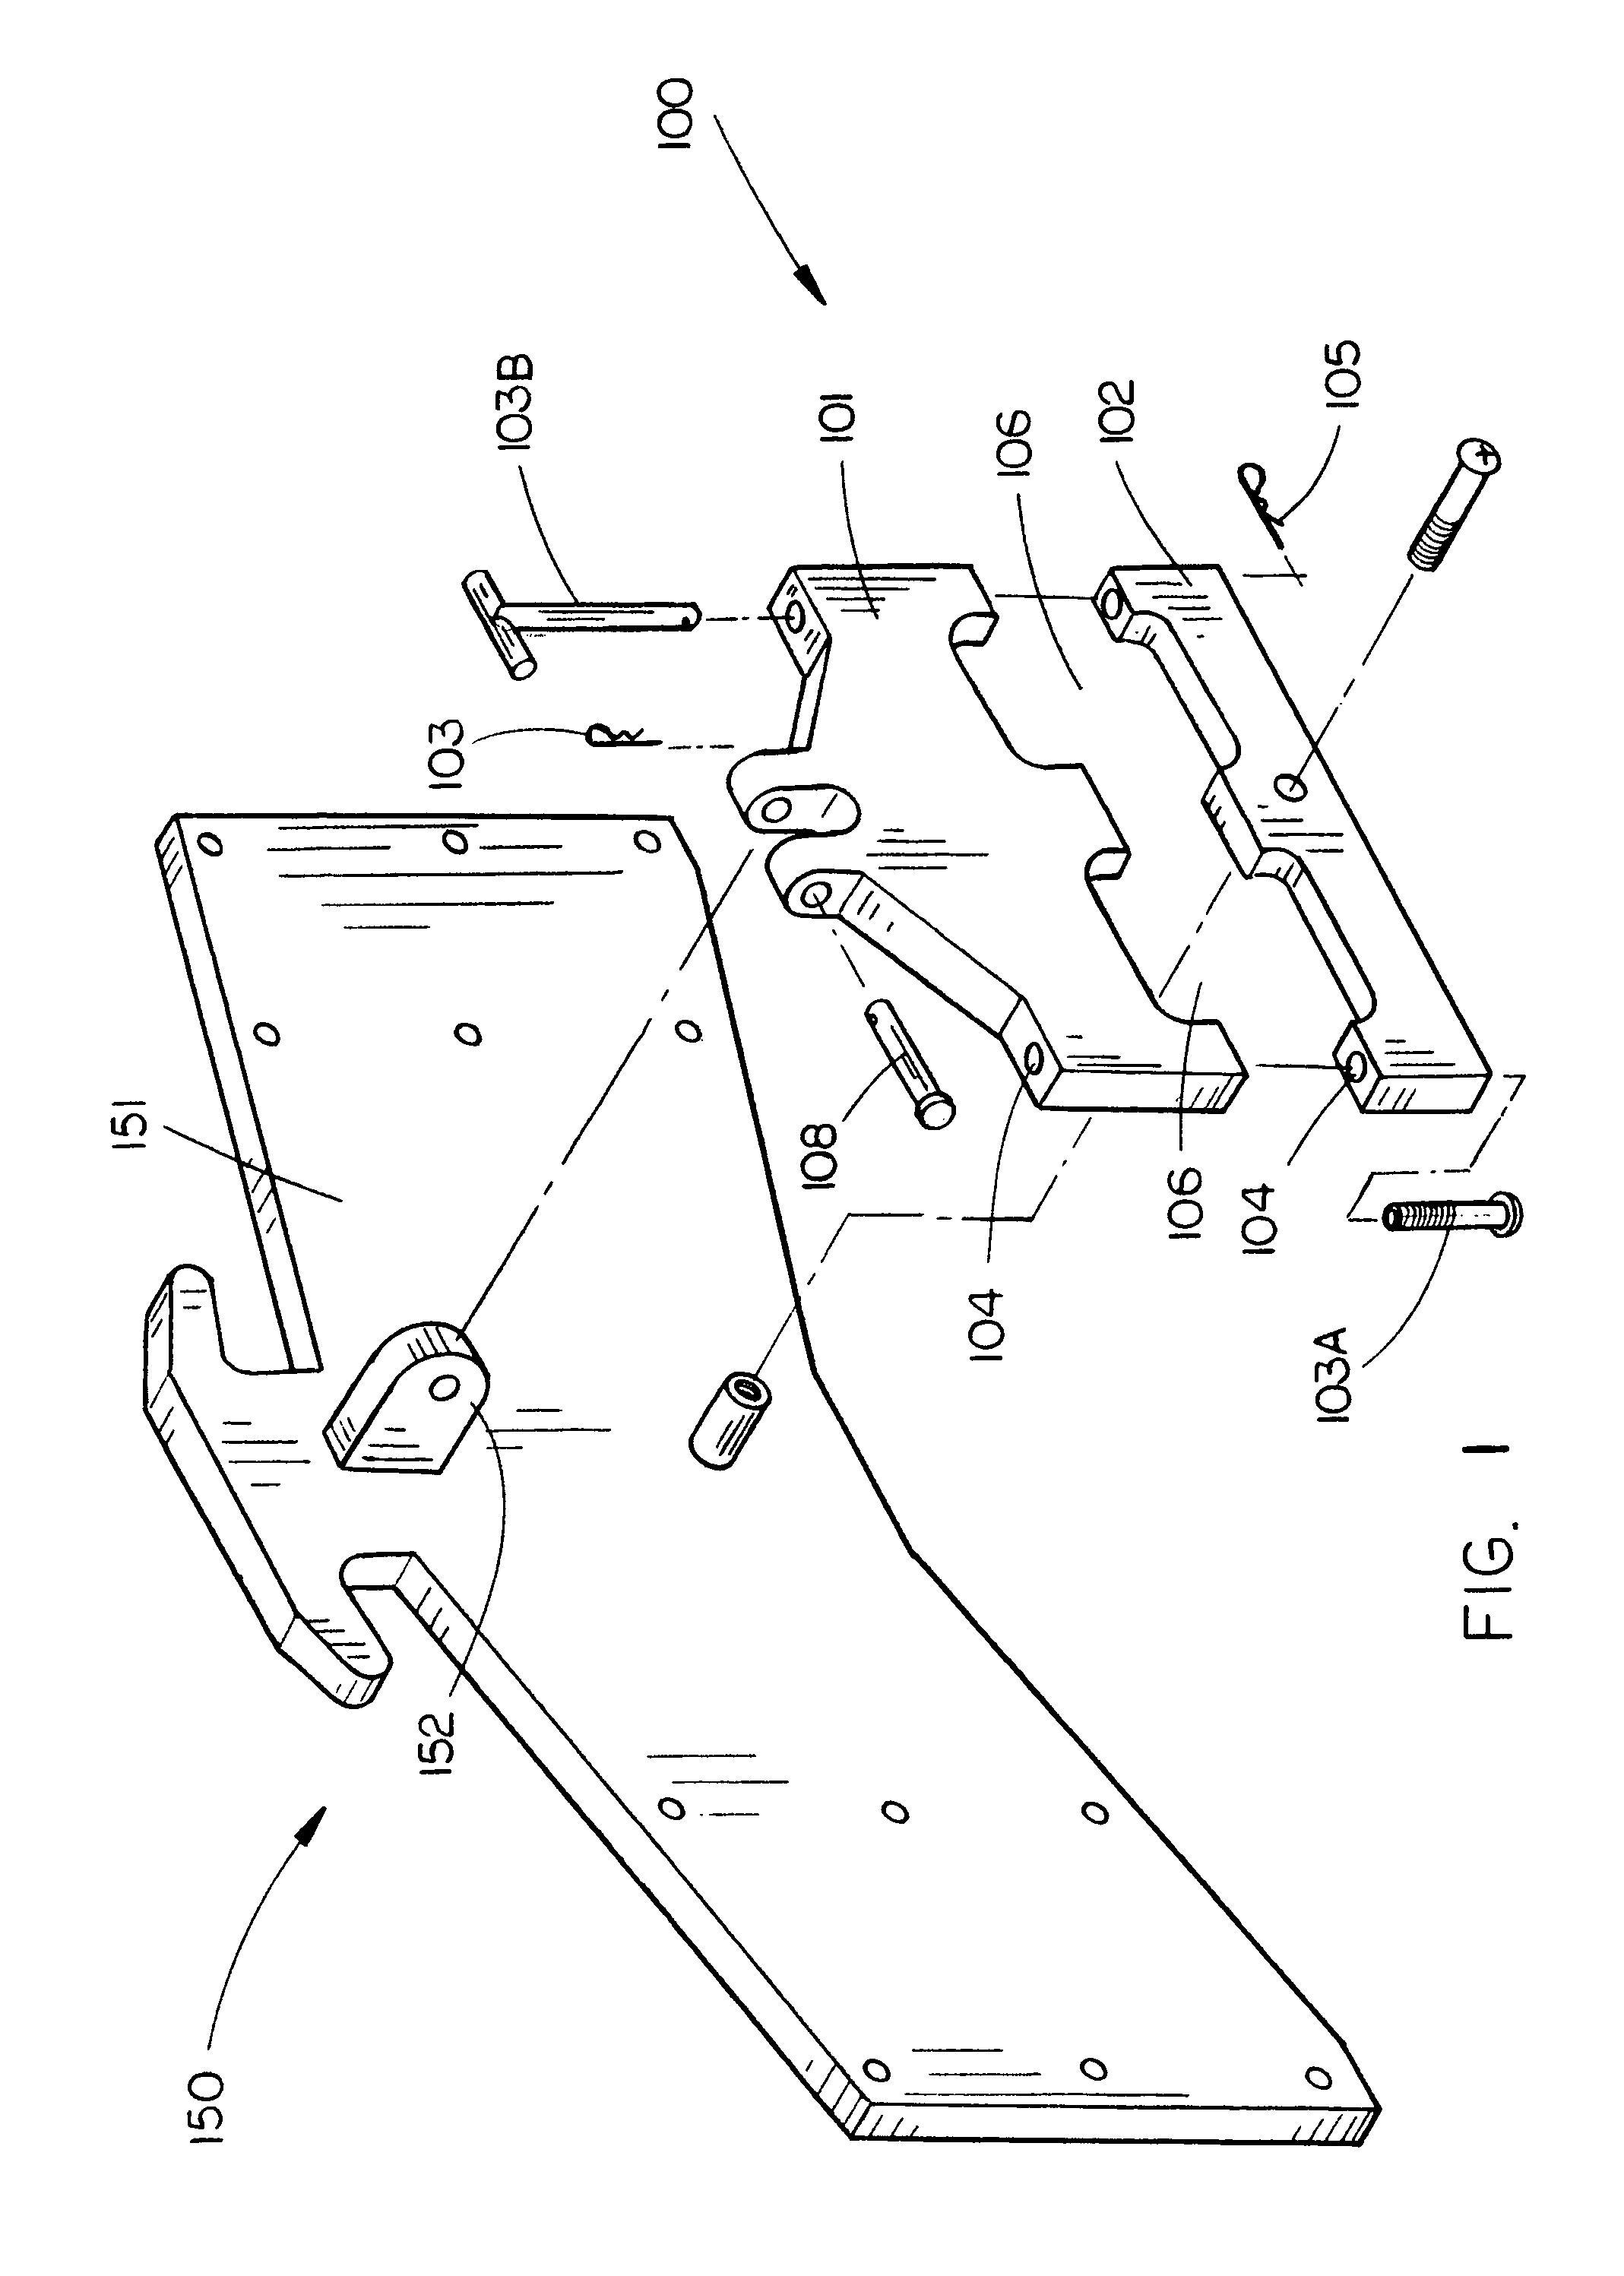 Cleat-mountable accessory apparatus